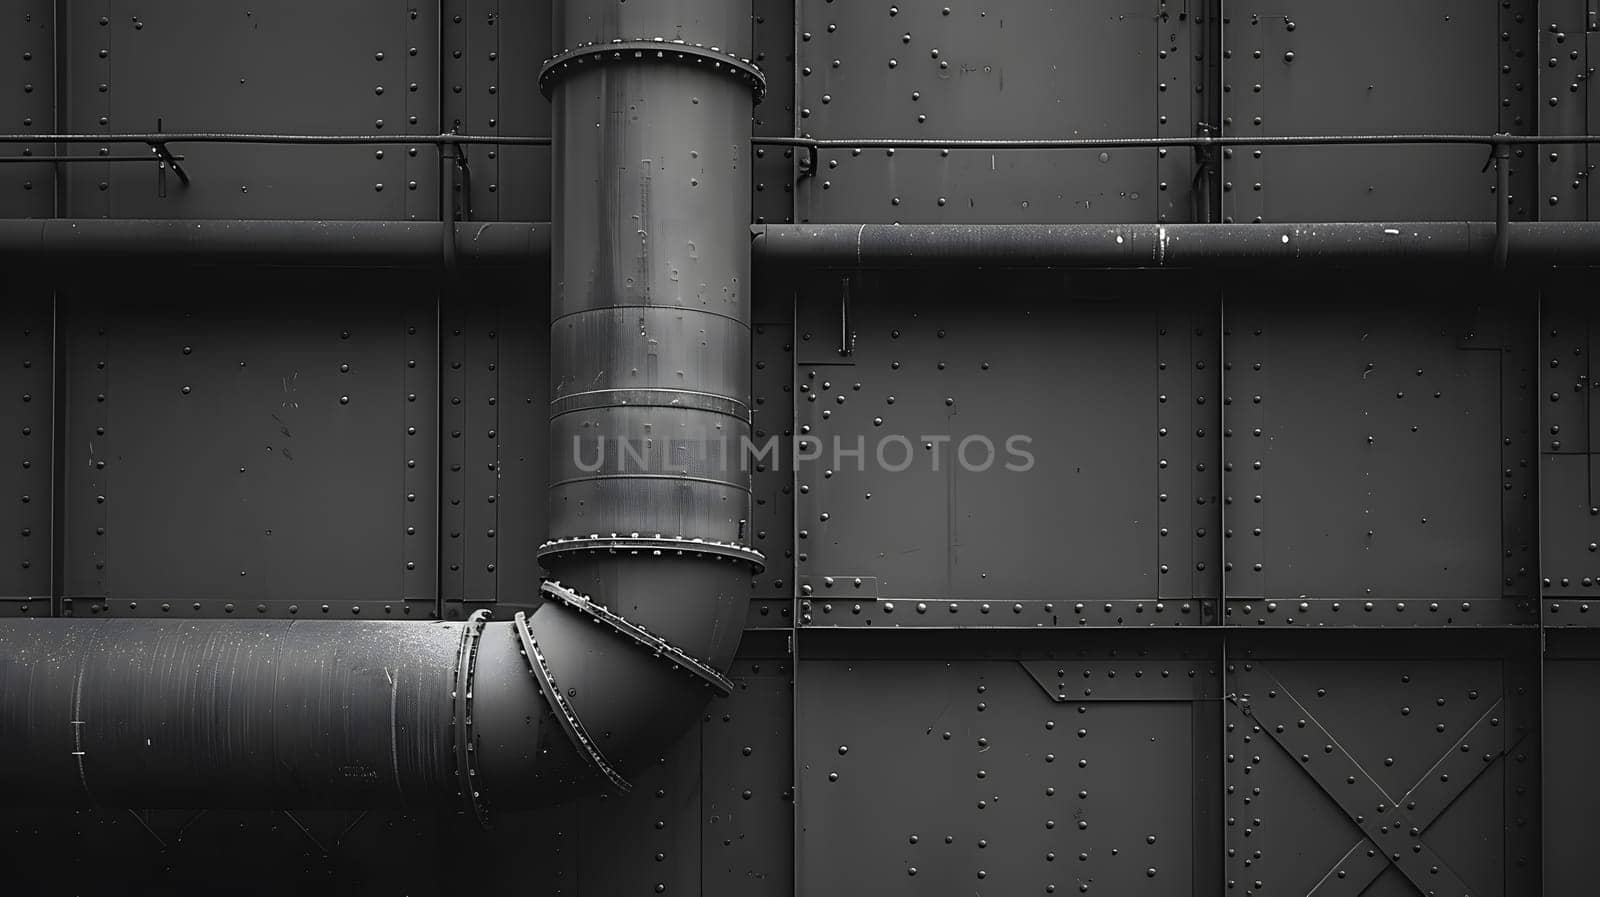 Monochrome photography of a metal gas pipe fixture on a grey wall by Nadtochiy